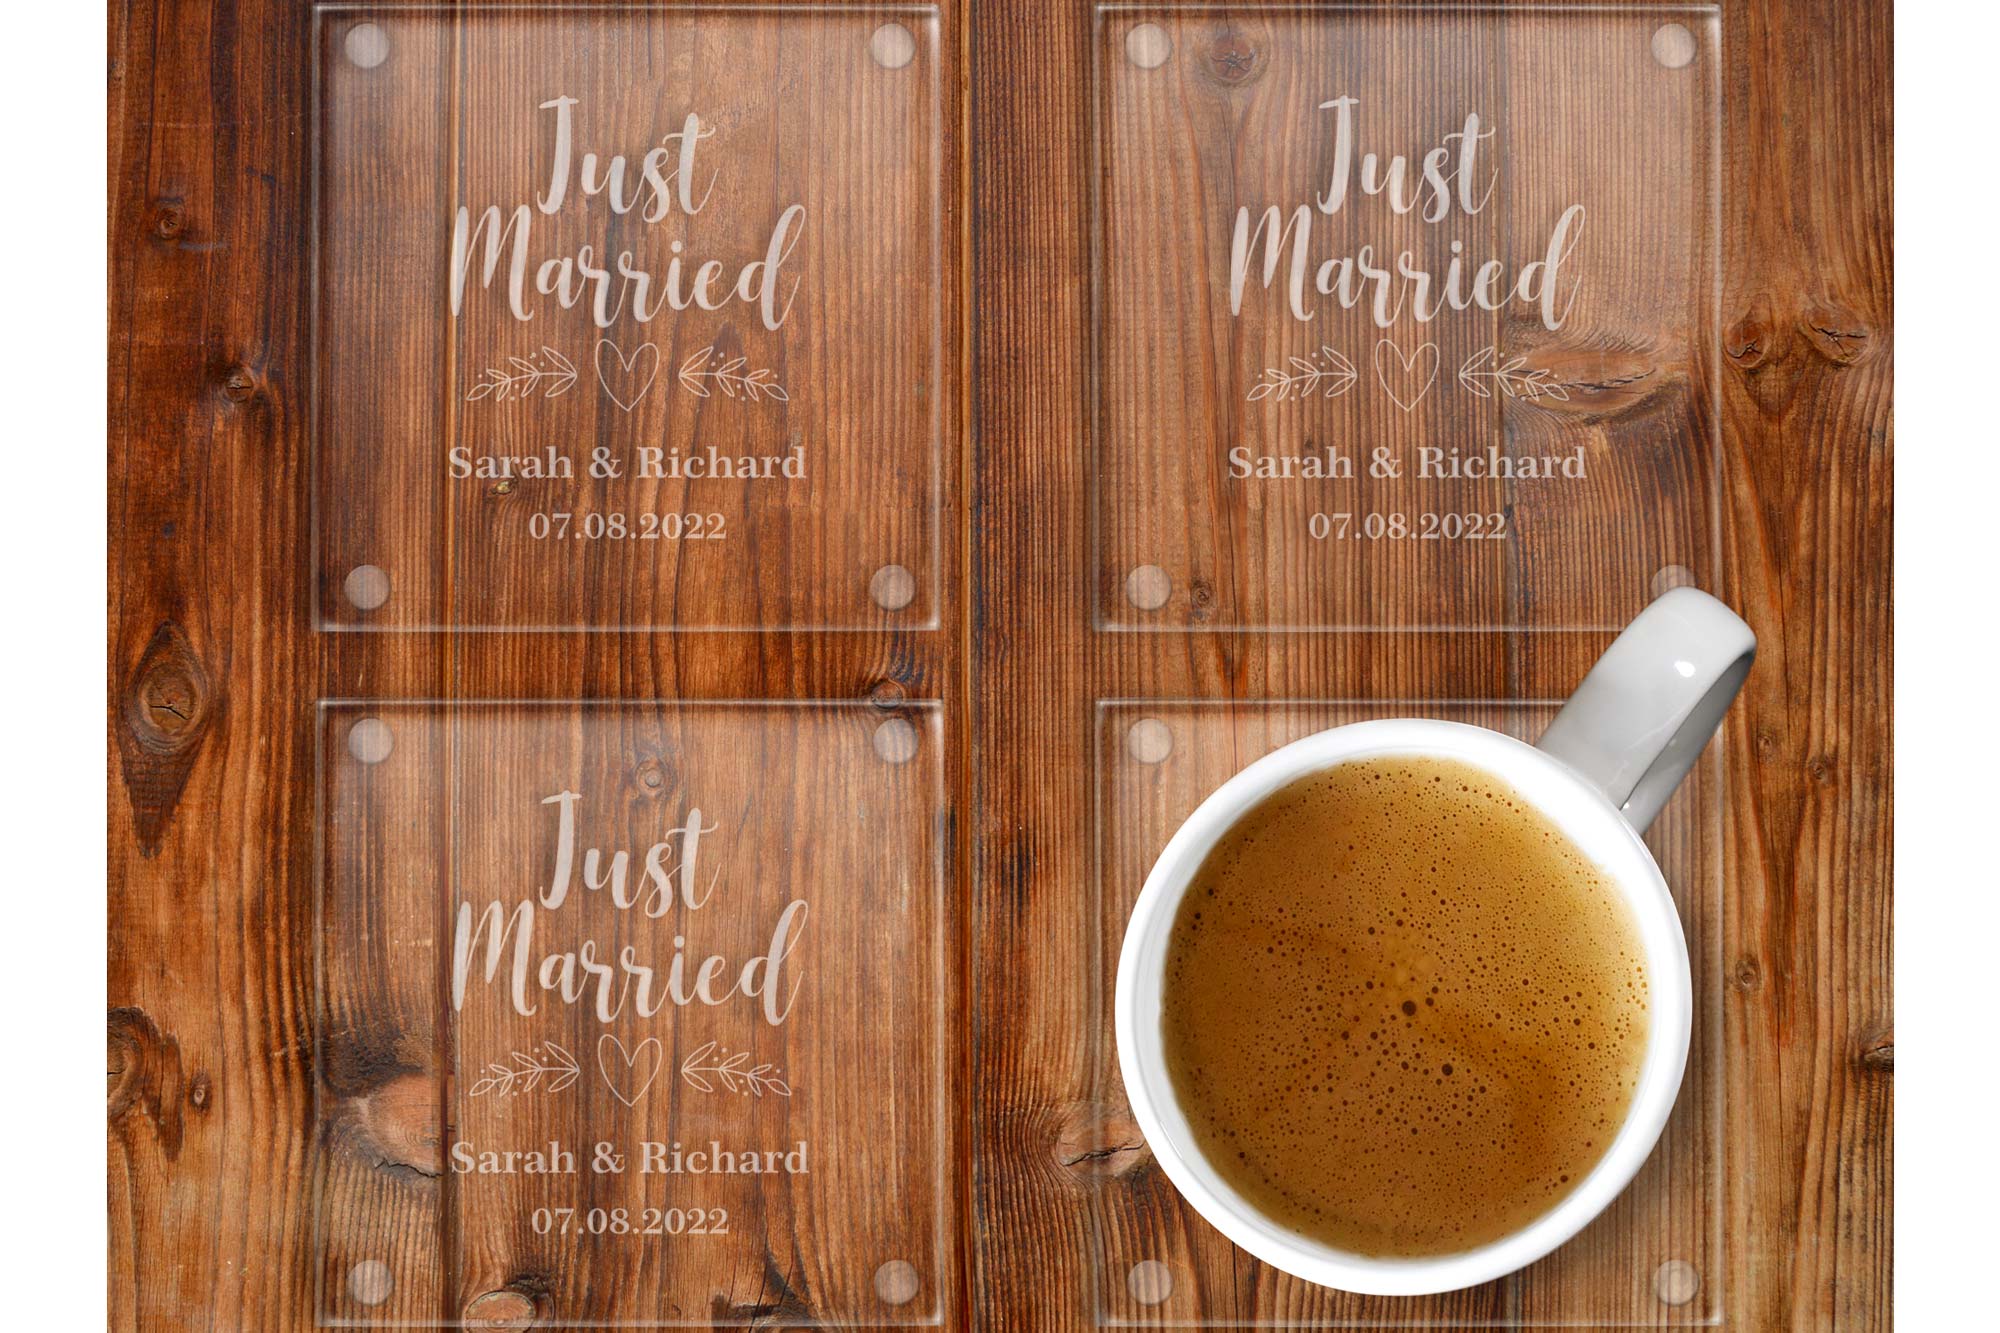 Just Married Glass Drinks Coasters Set of 4